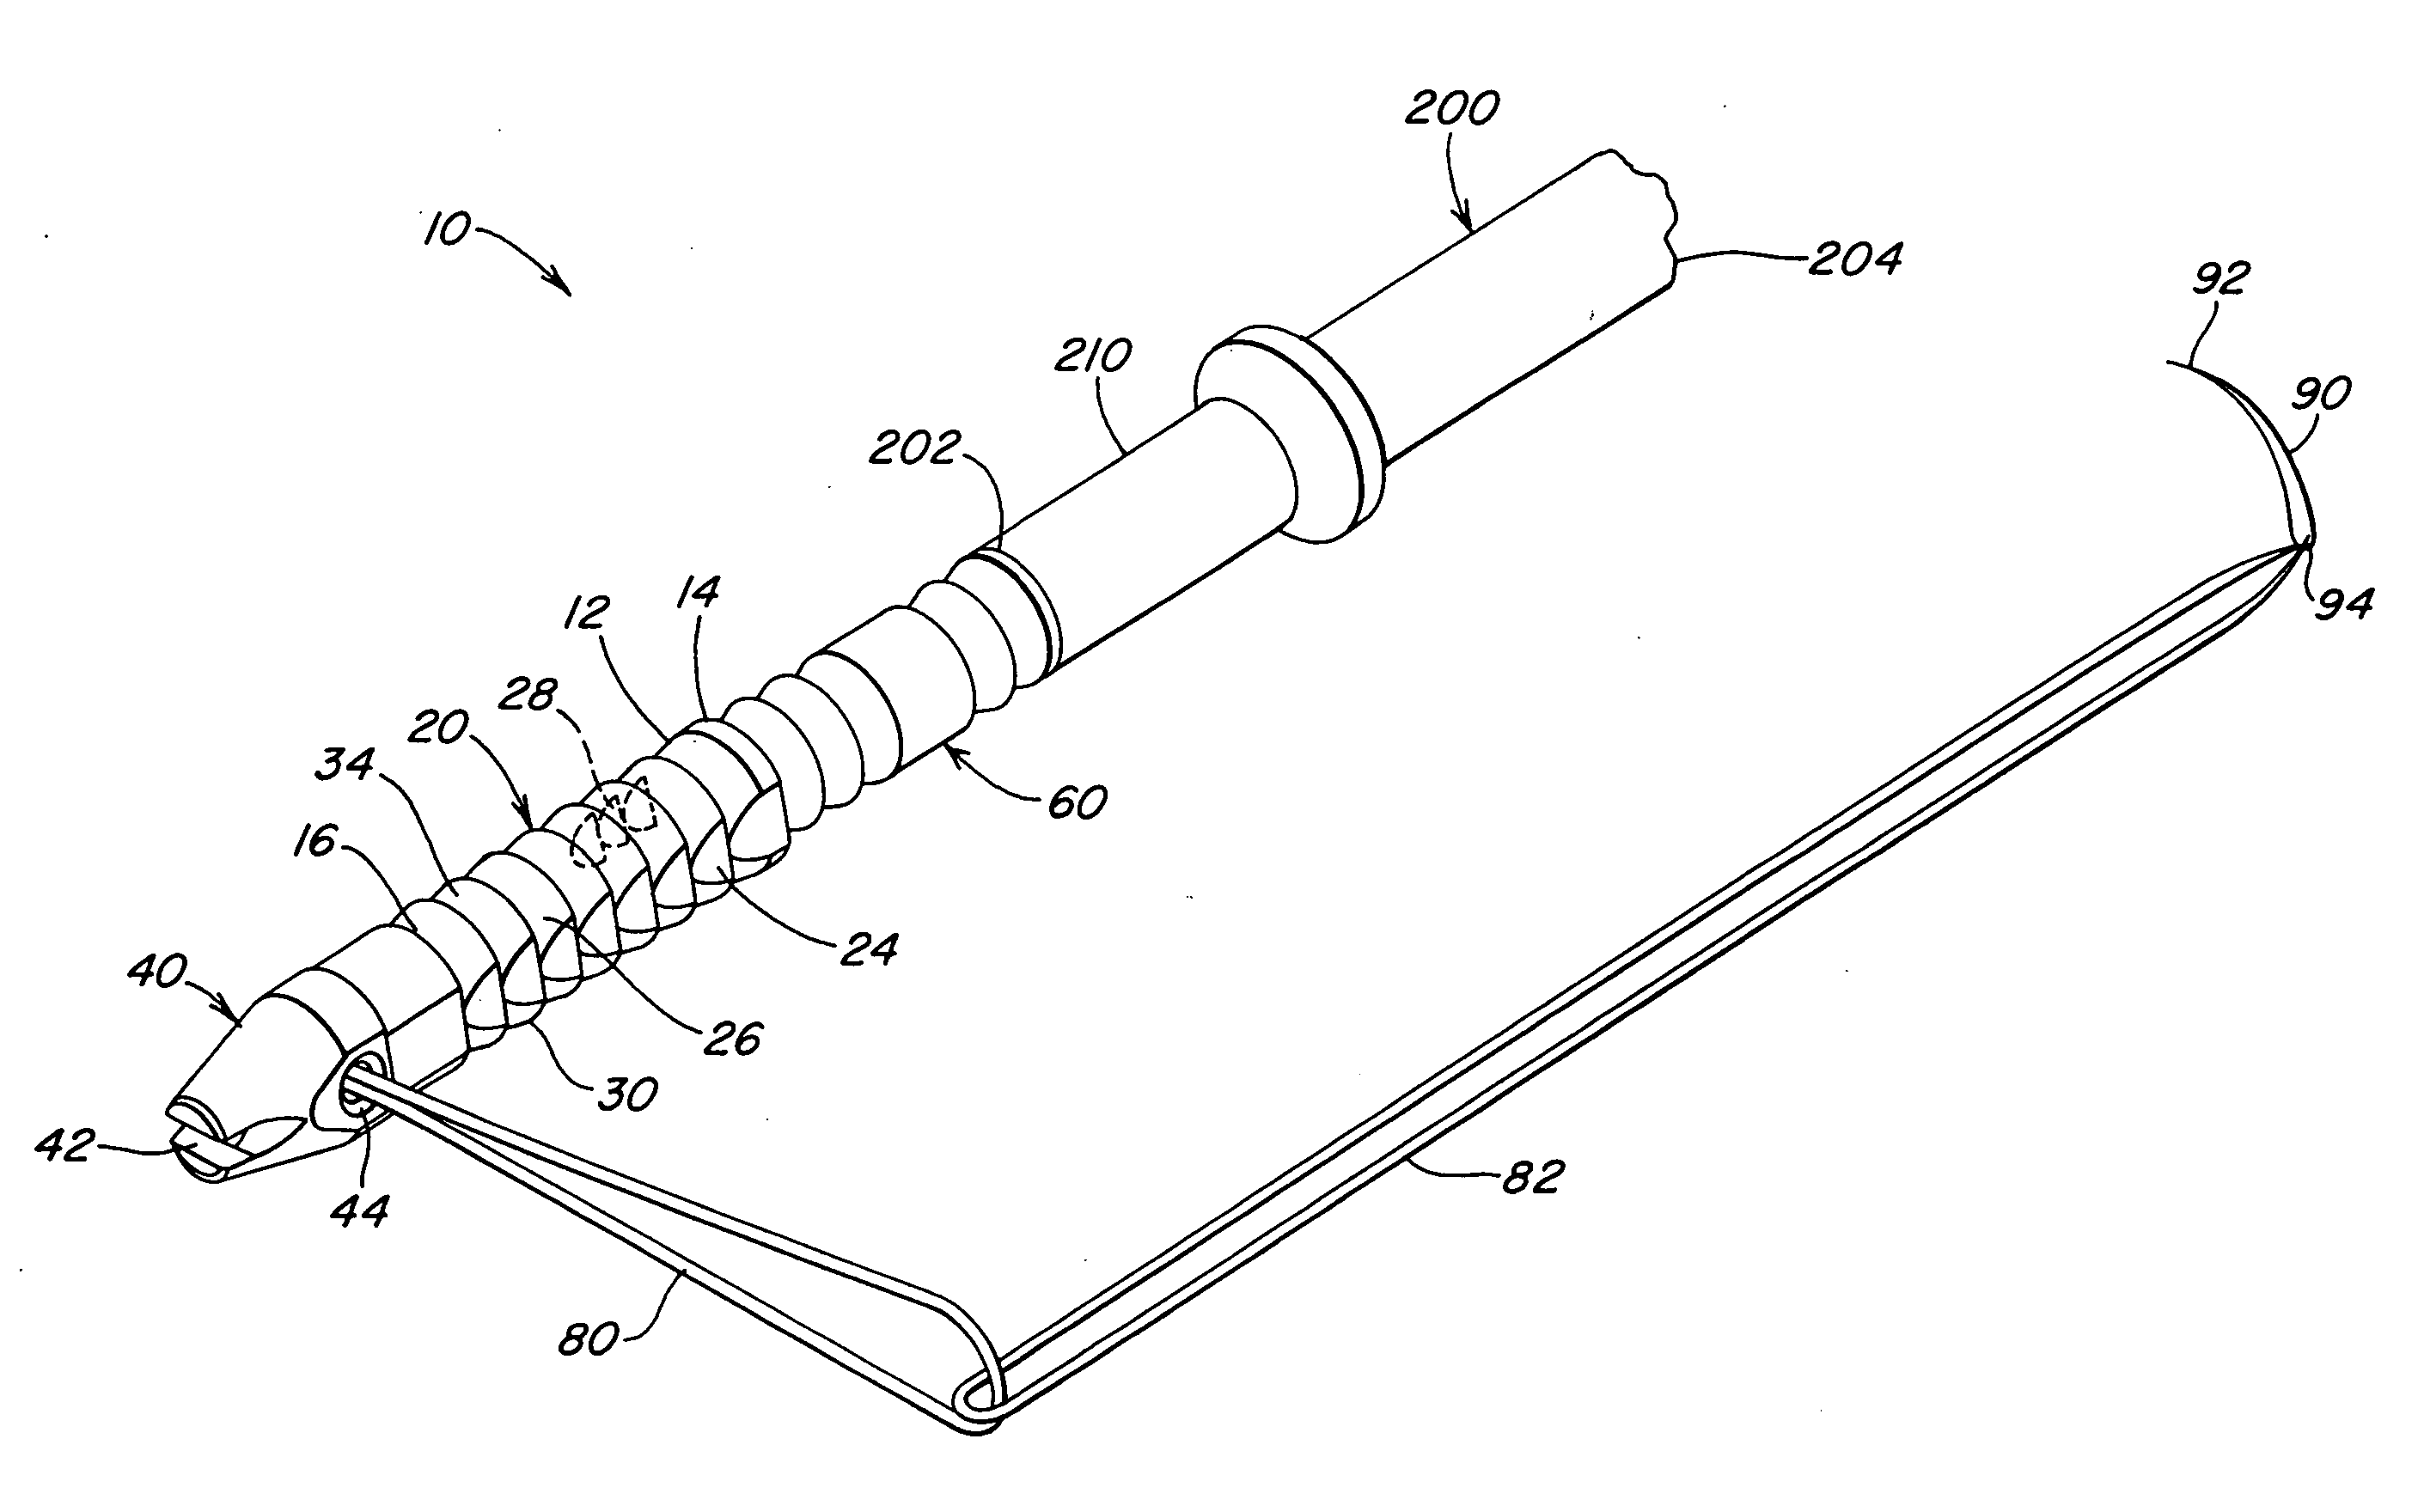 Knotless bioabsorbable suture anchor system and method